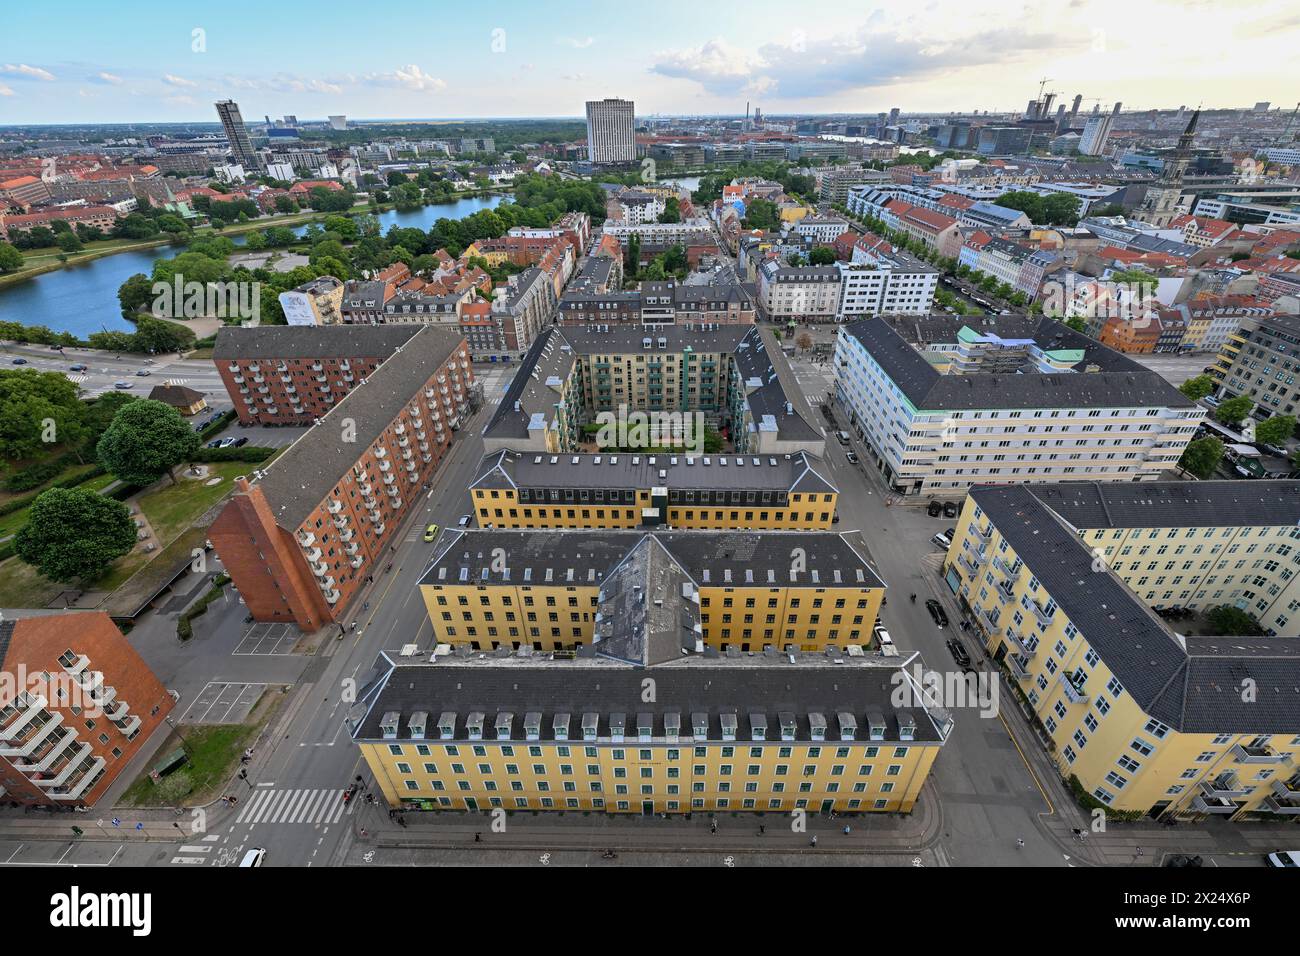 Panoramic view of the skyline of Copenhagen, Denmark from the Church of Our Savior. Stock Photo